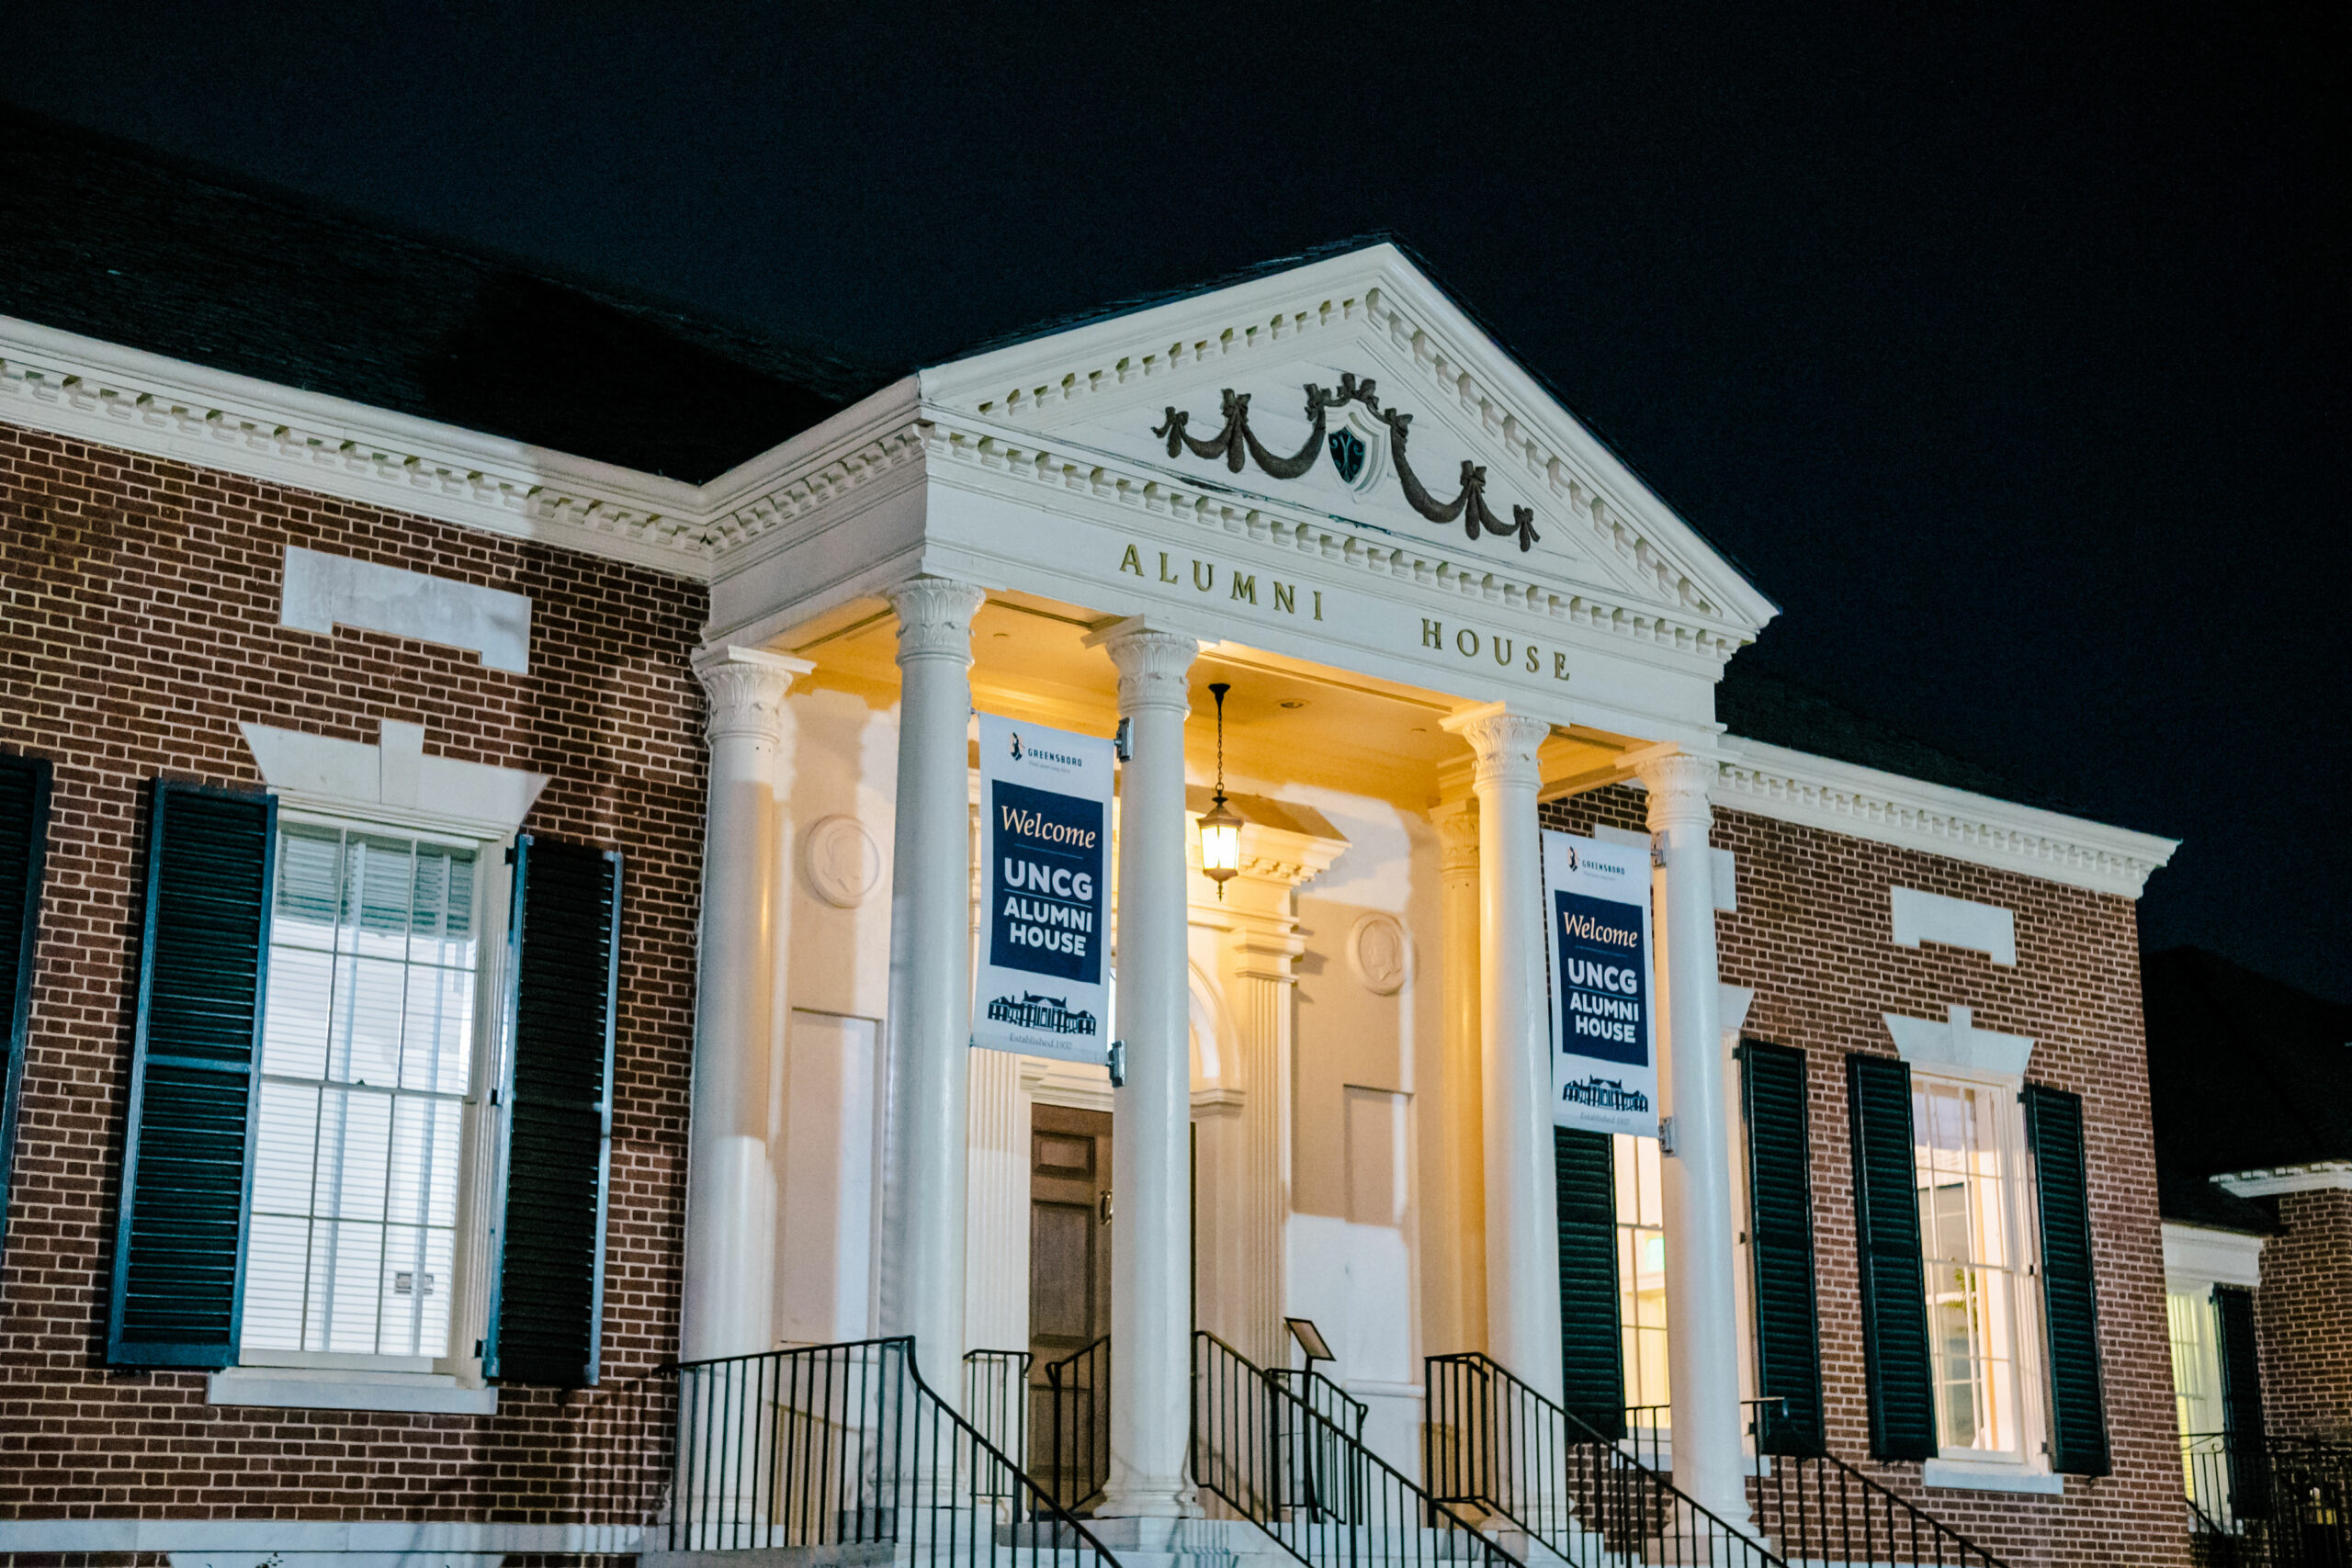 Night photo of the front of the Alumni House.